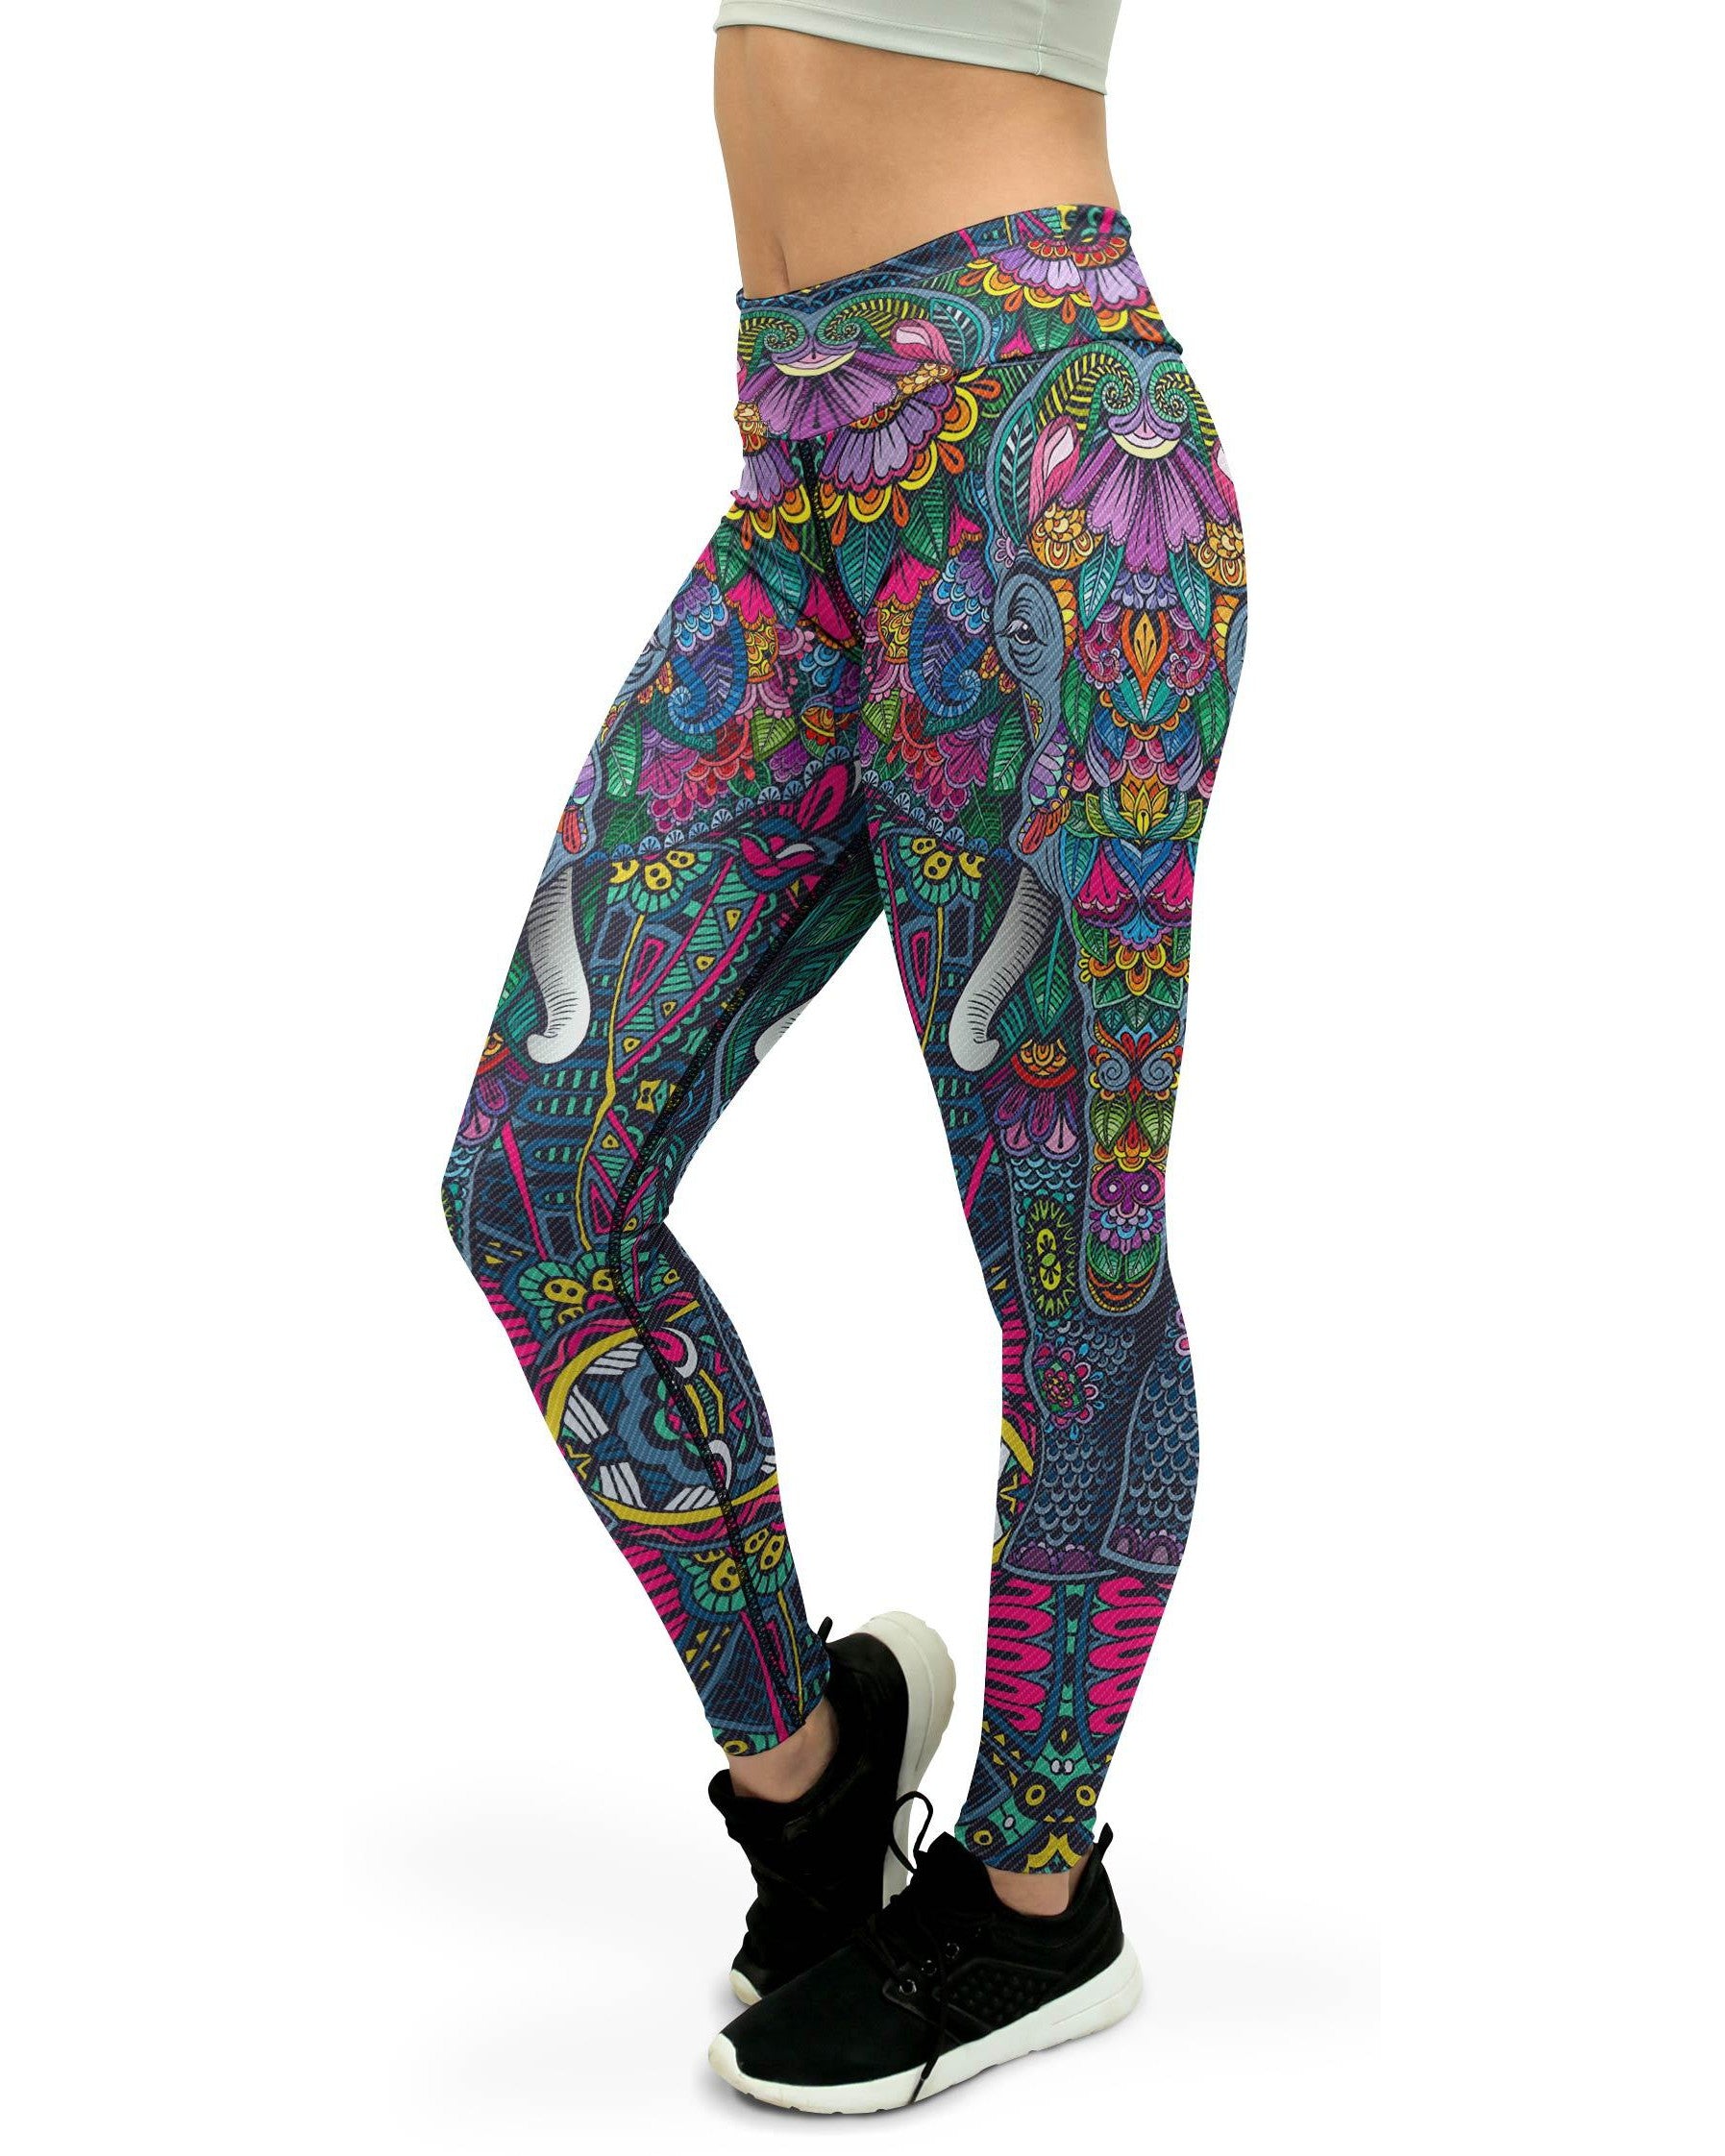 BIG ELEPHANT Girl's Athletic Yoga Leggings - Running Dance Tights, Stretch  Active Pants for Youth Kids 4-13 Years Green - Walmart.com